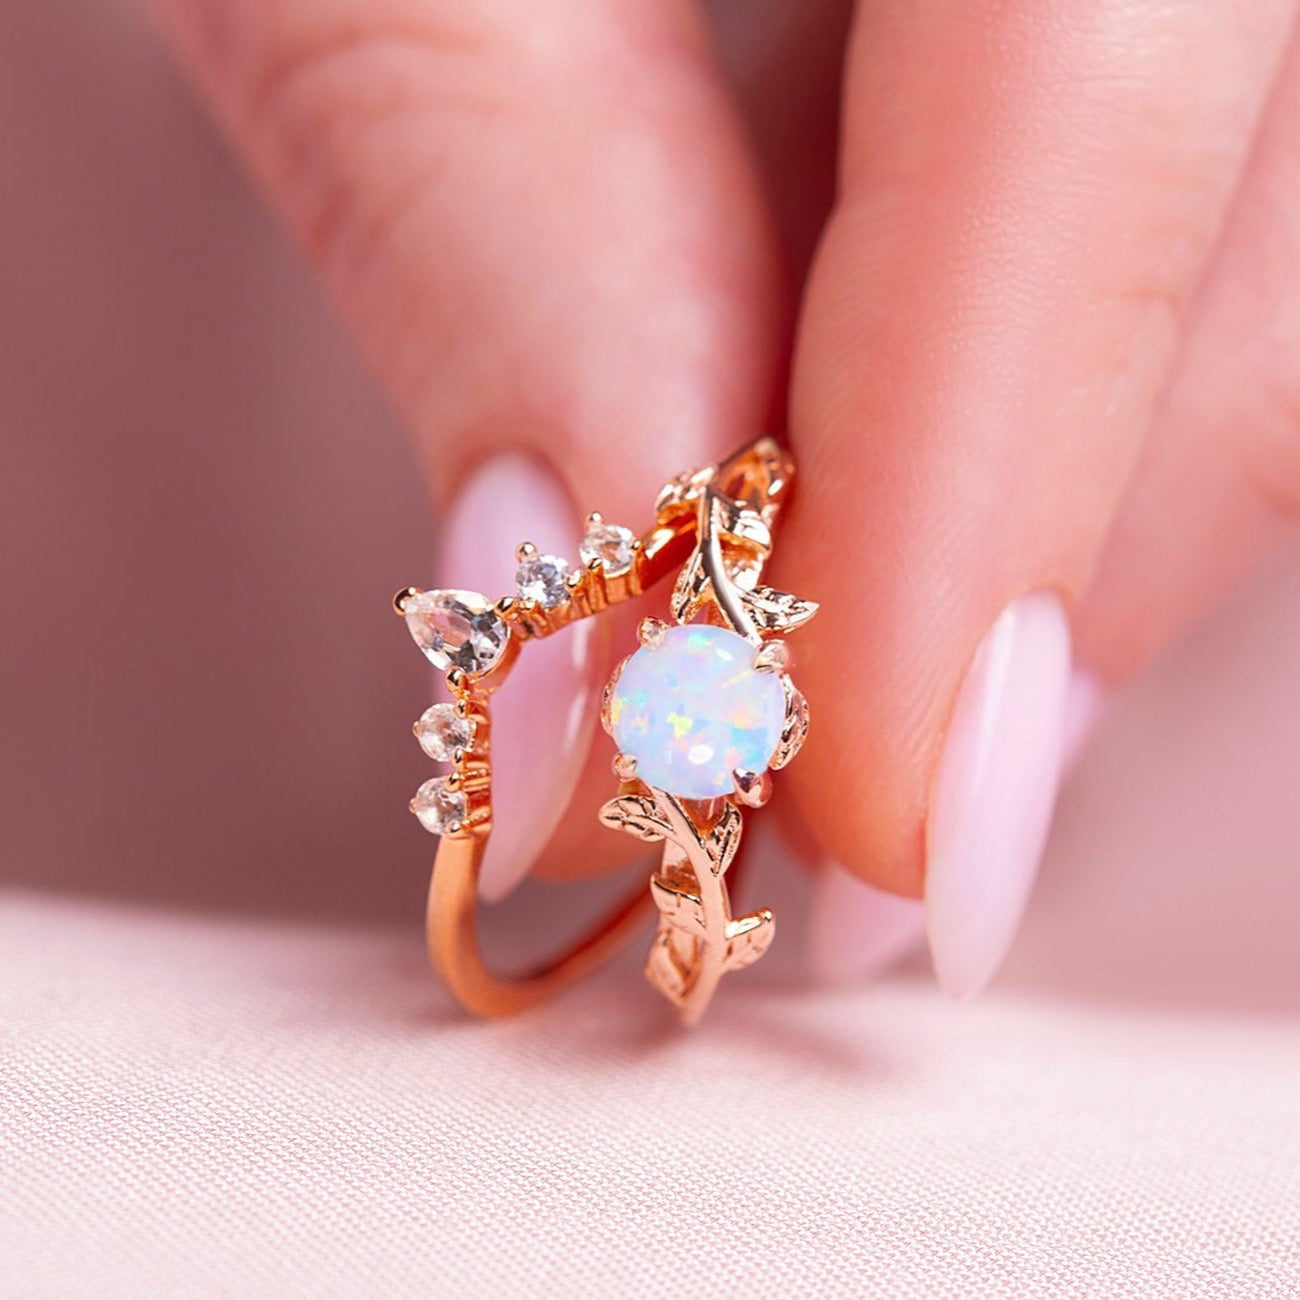 Silver Ring set for women. One ring in a form of twig with opal gemstone, another ring is v-shaped with zircon gemstones. Both rings are gold plated